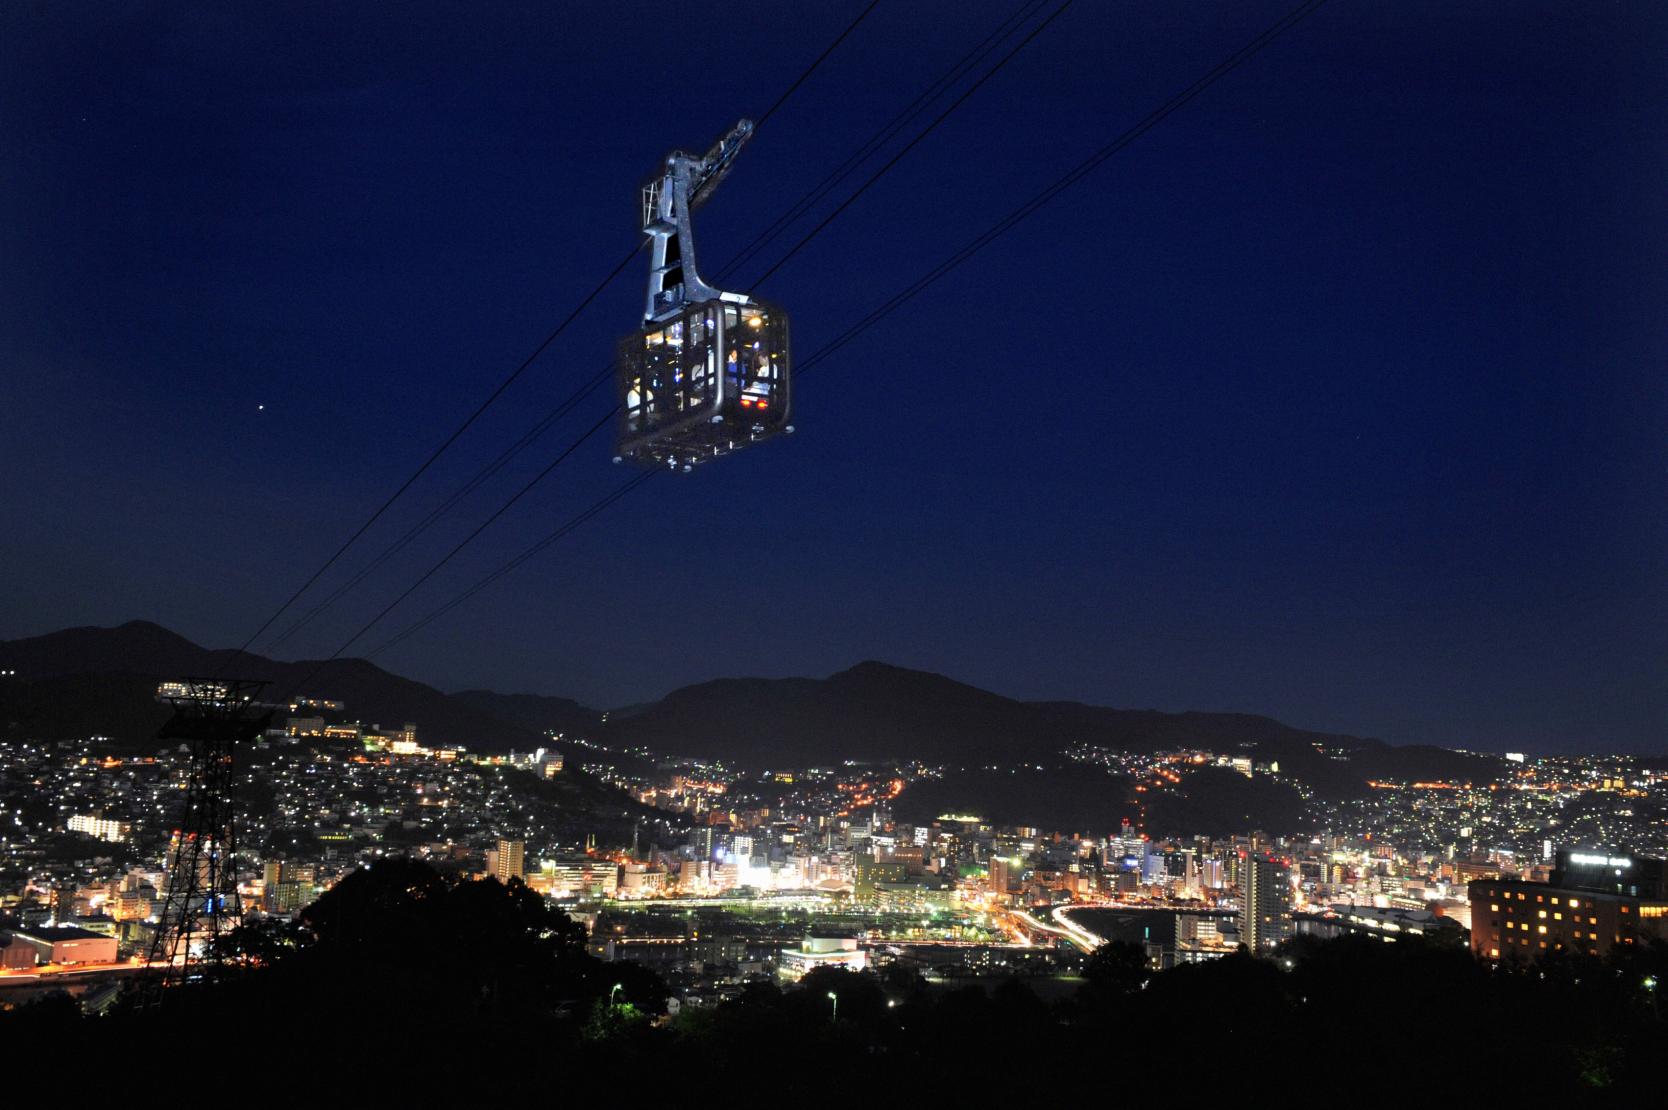 Announcement: The use of Nagasaki Ropeway during 27th to May 6th-1